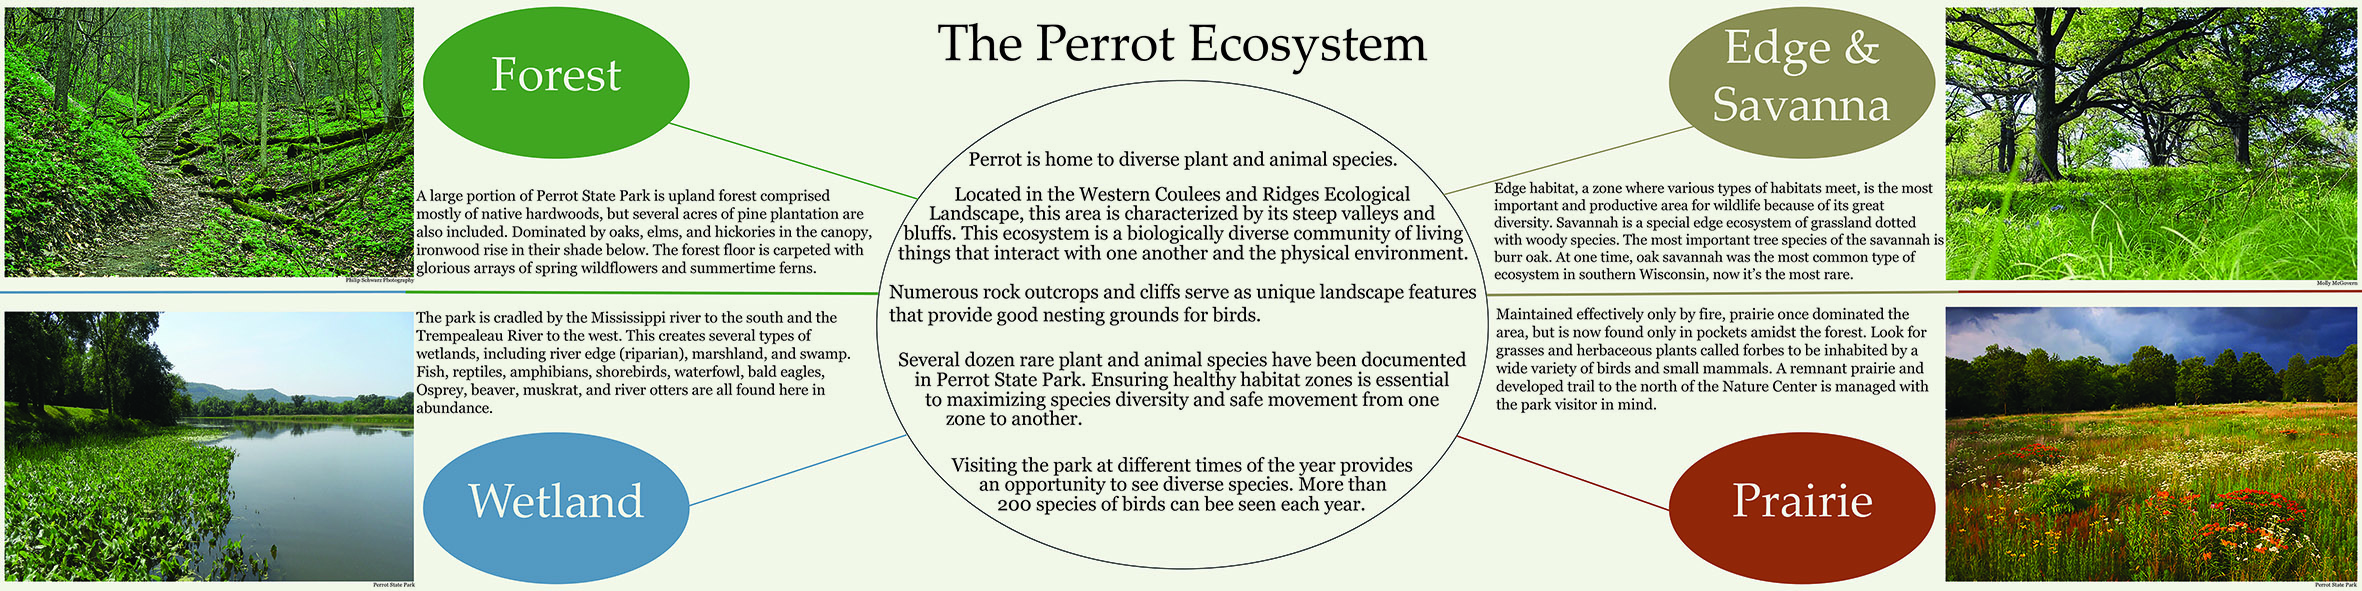 The Perrot Ecosystem